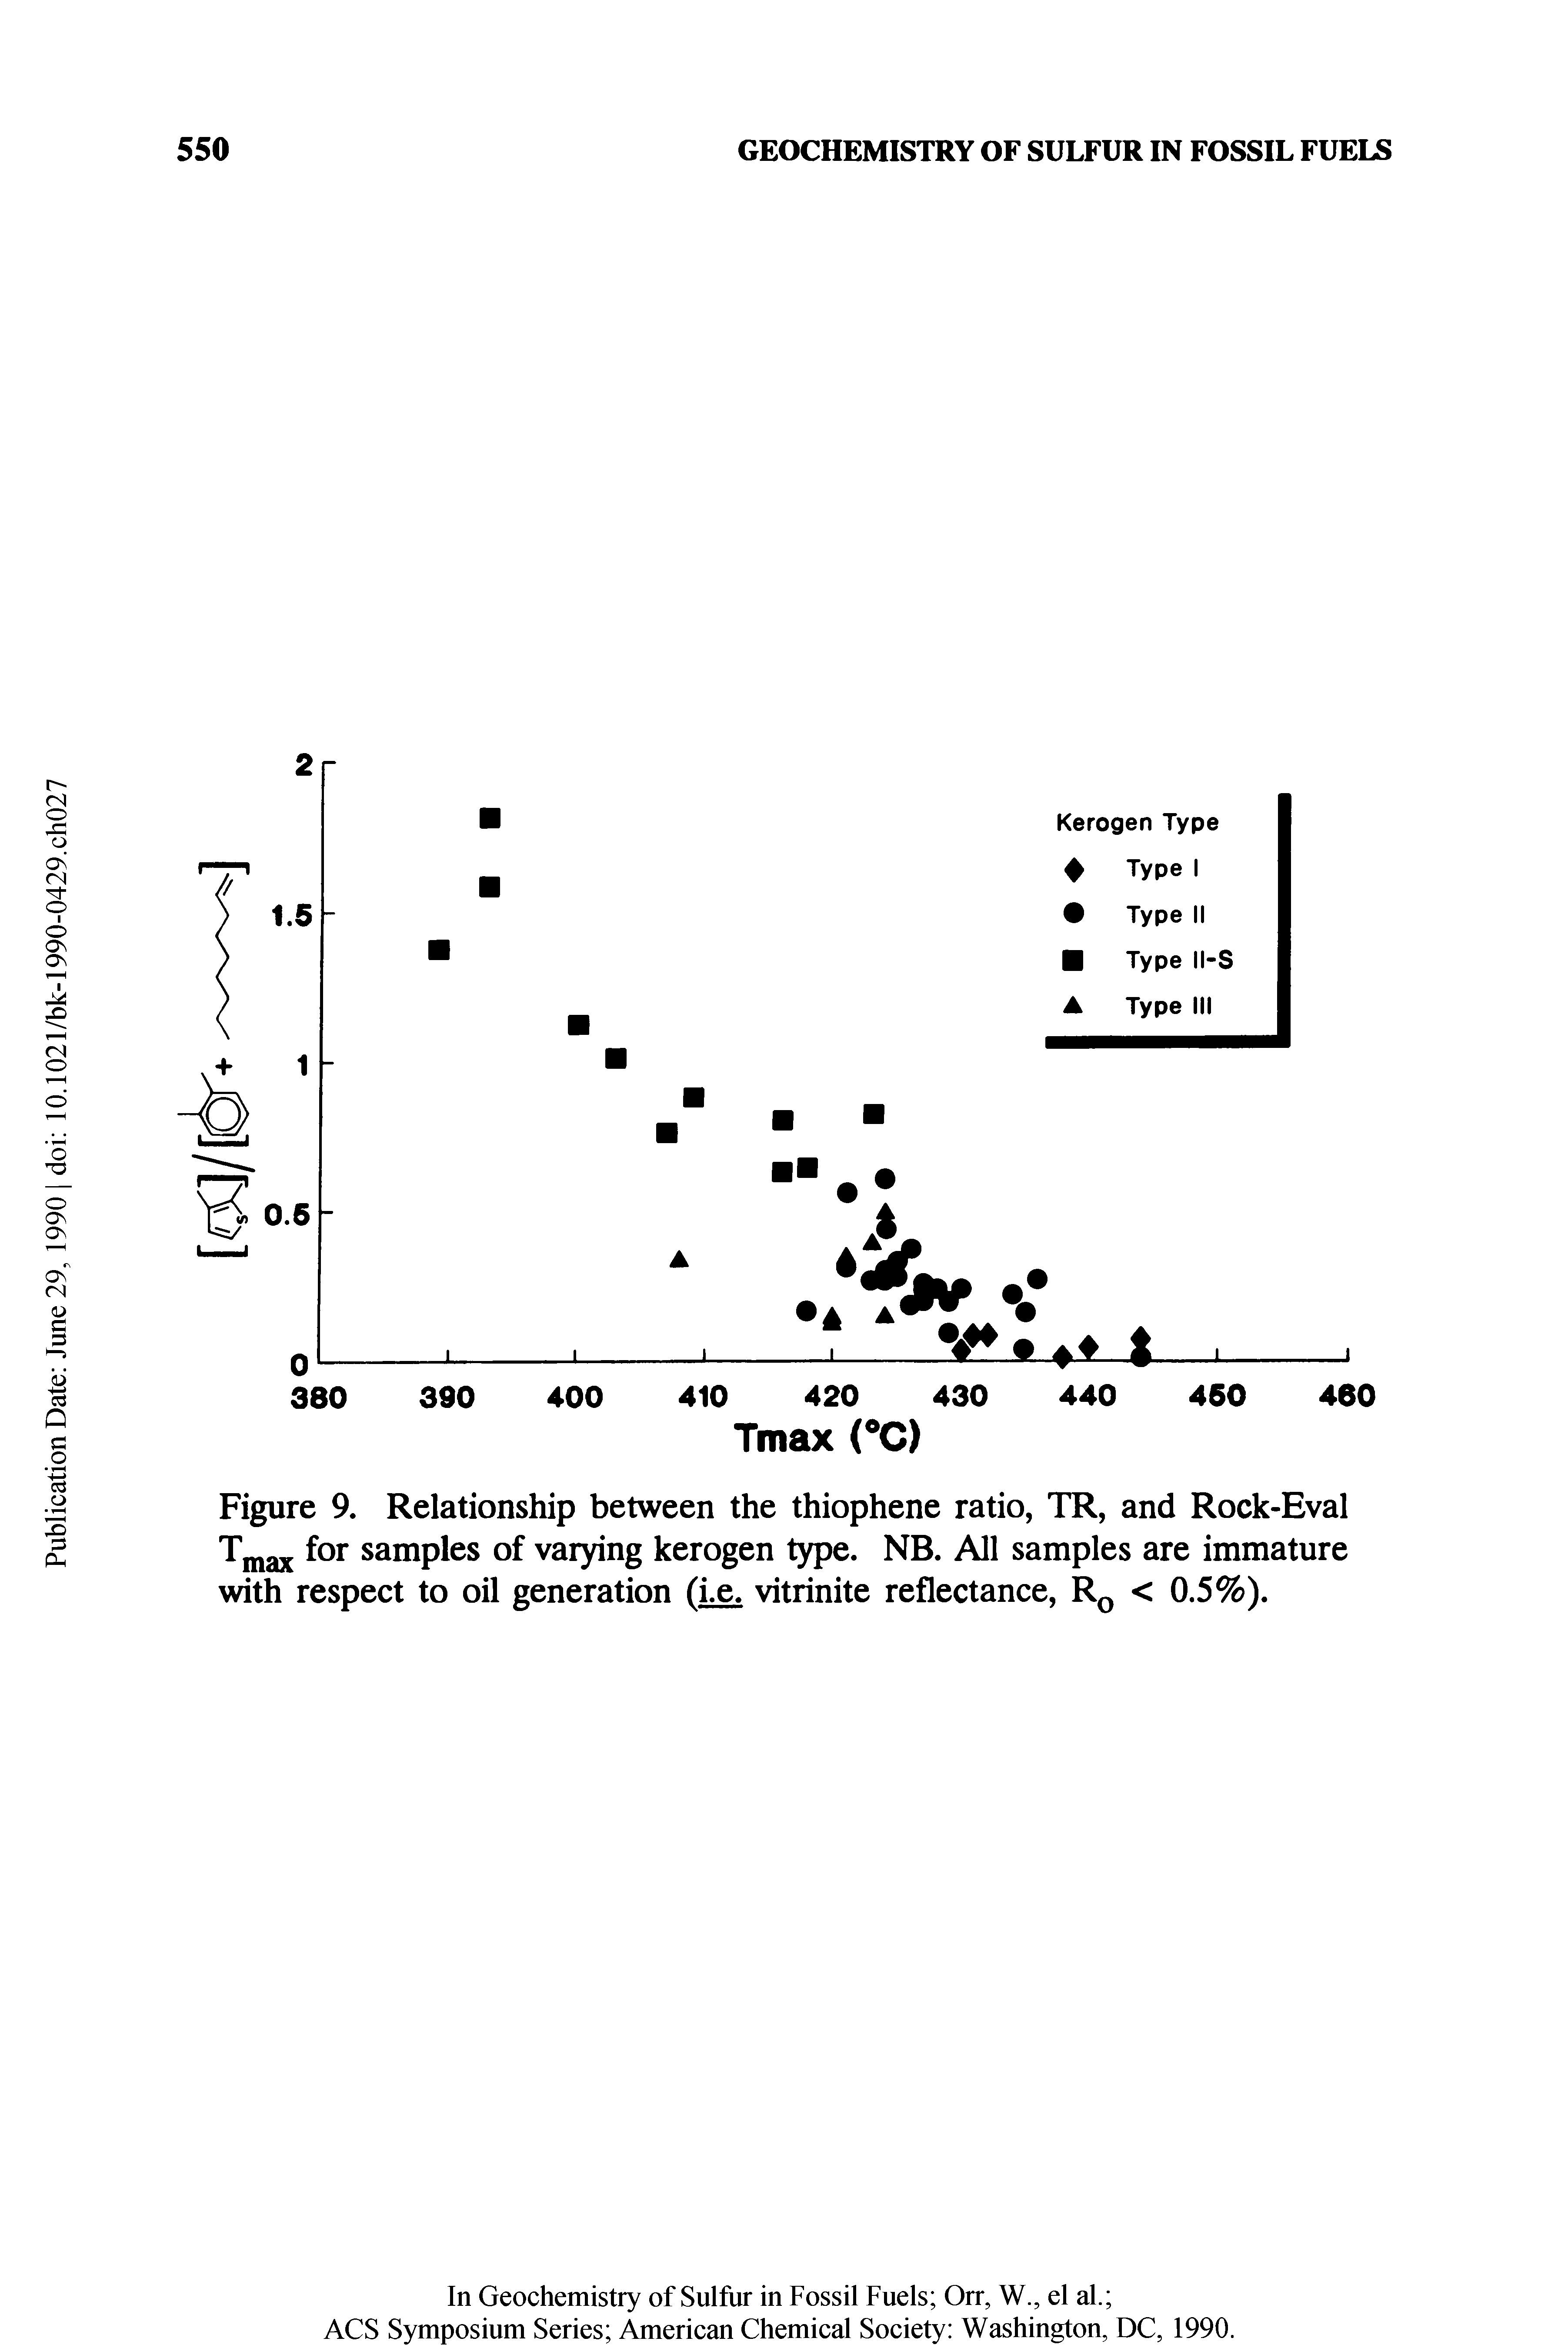 Figure 9. Relationship between the thiophene ratio, TR, and Rock-Eval Tmax f°r samples °f varying kerogen type. NB. All samples are immature with respect to oil generation (i.e. vitrinite reflectance, R0 < 0.5%).